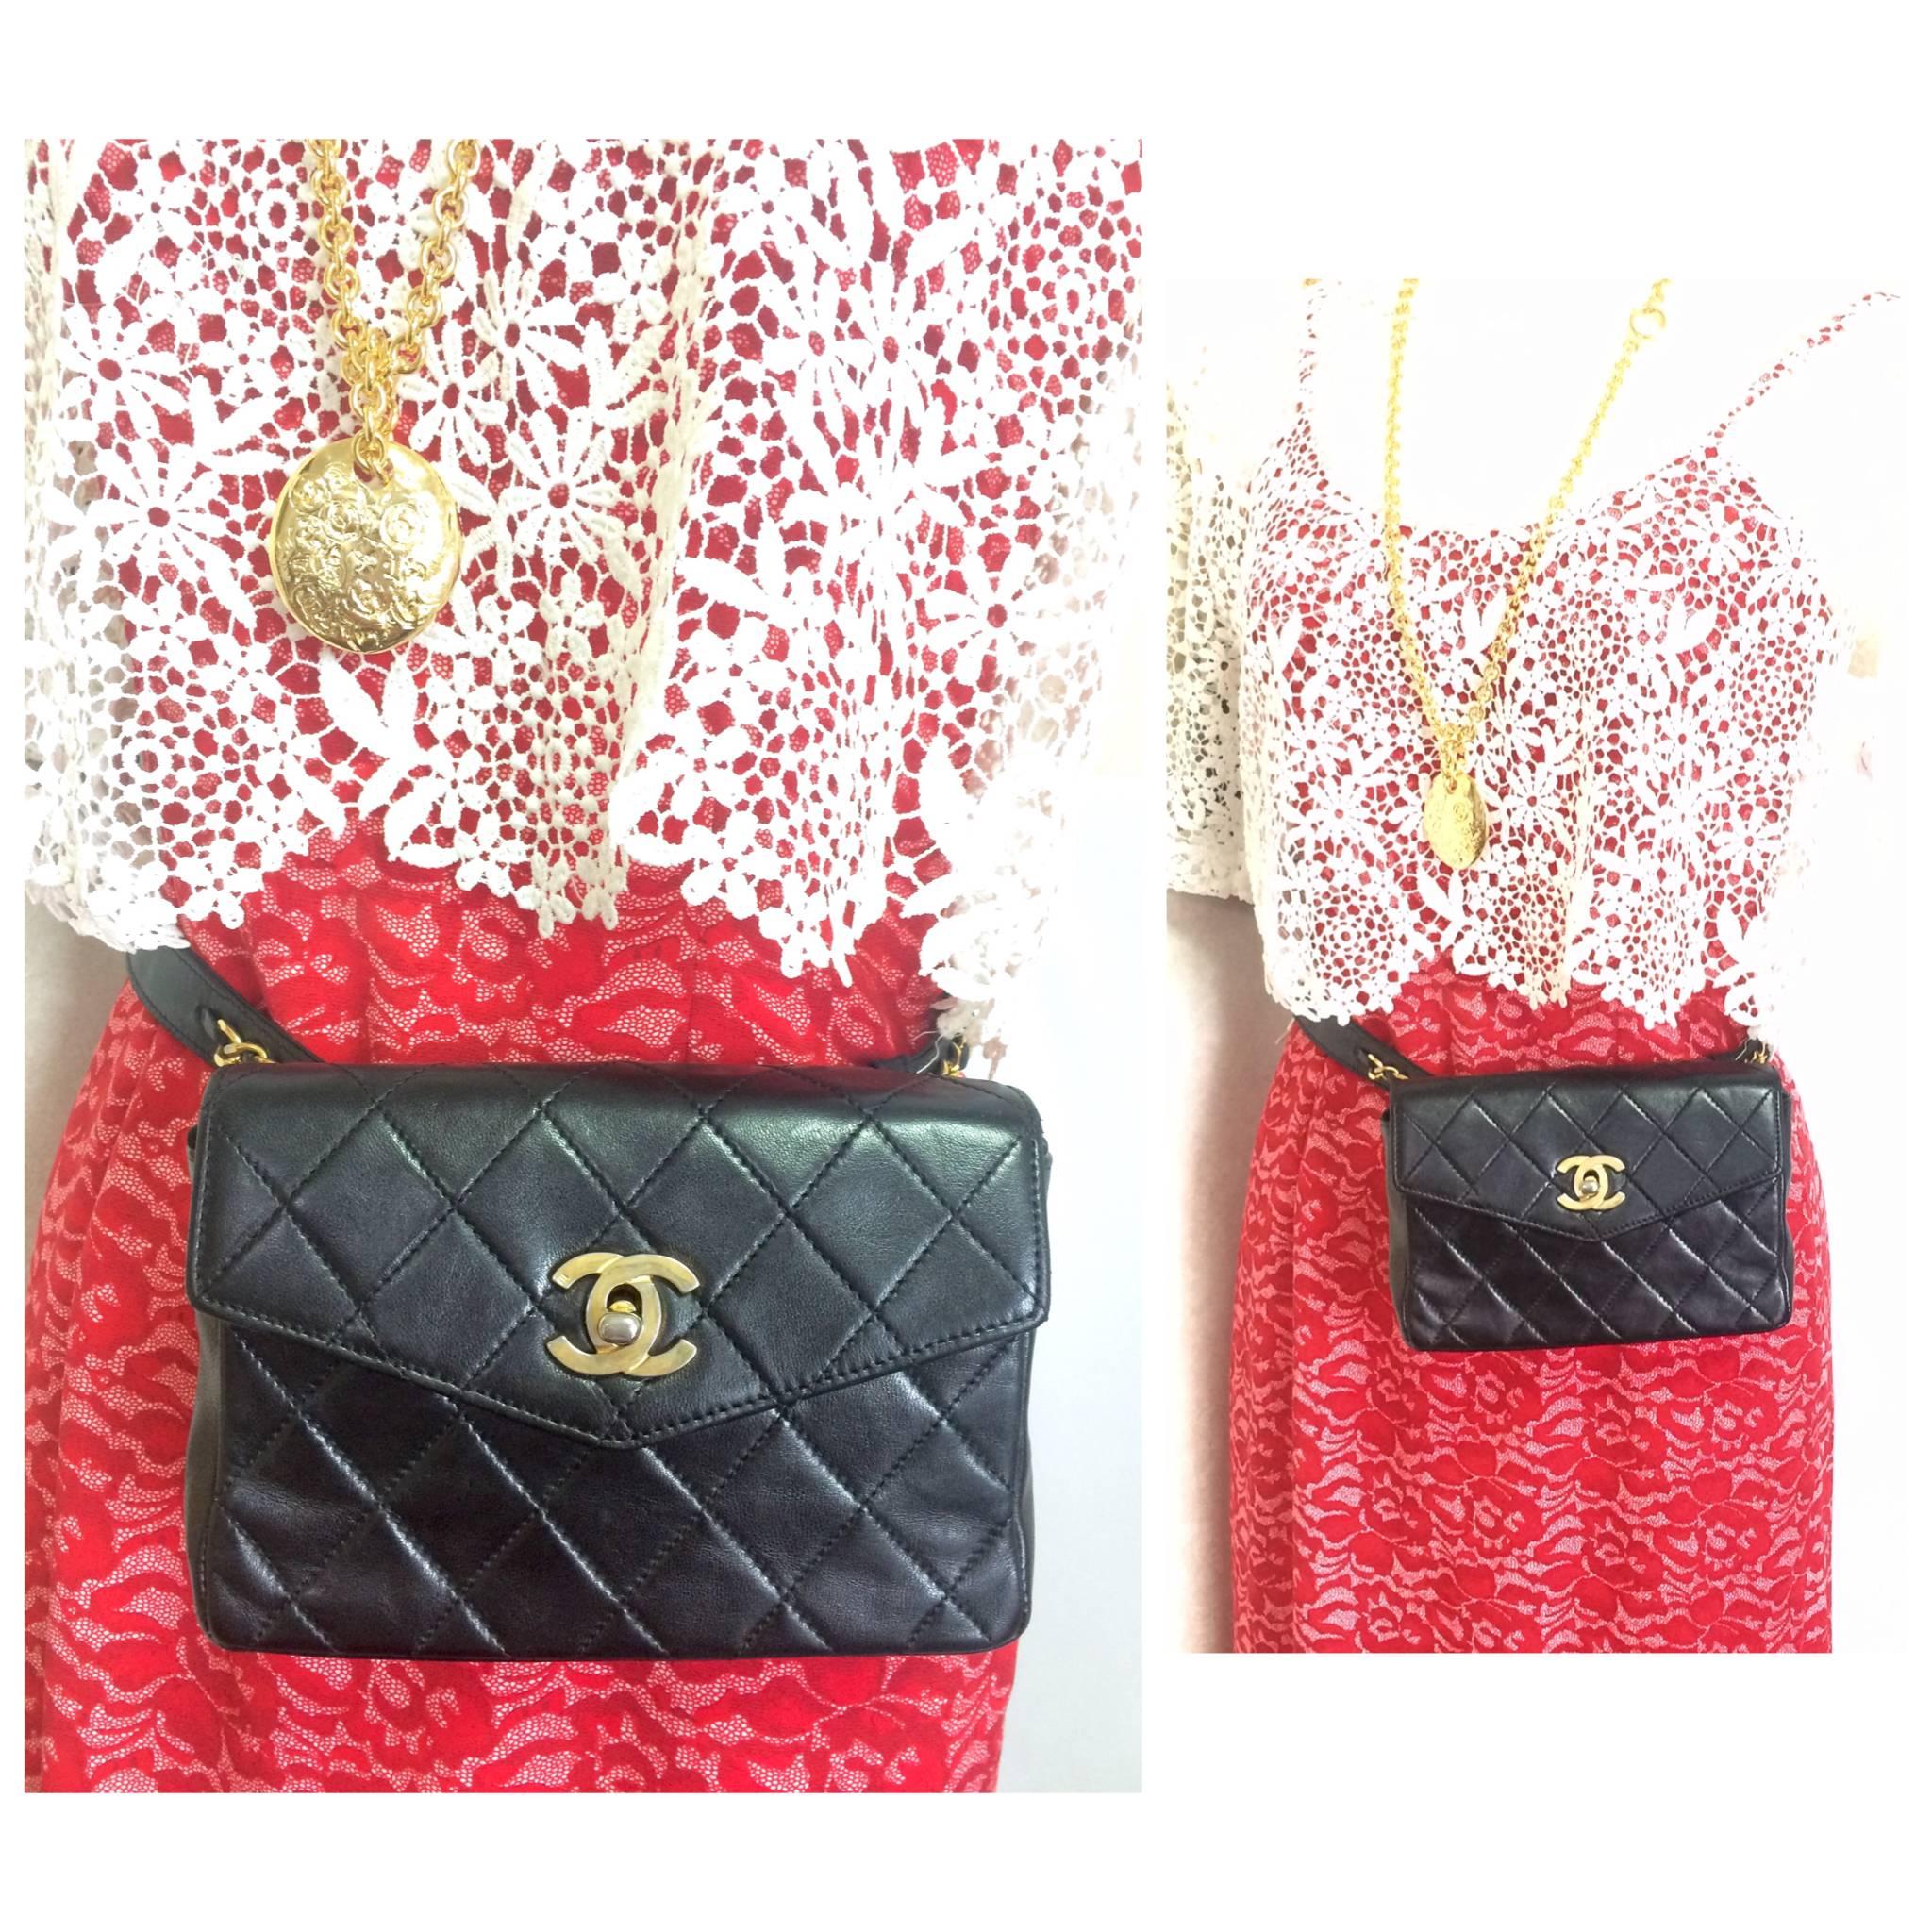 Vintage CHANEL black waist purse, fanny pack with golden CC and chain belt. 5